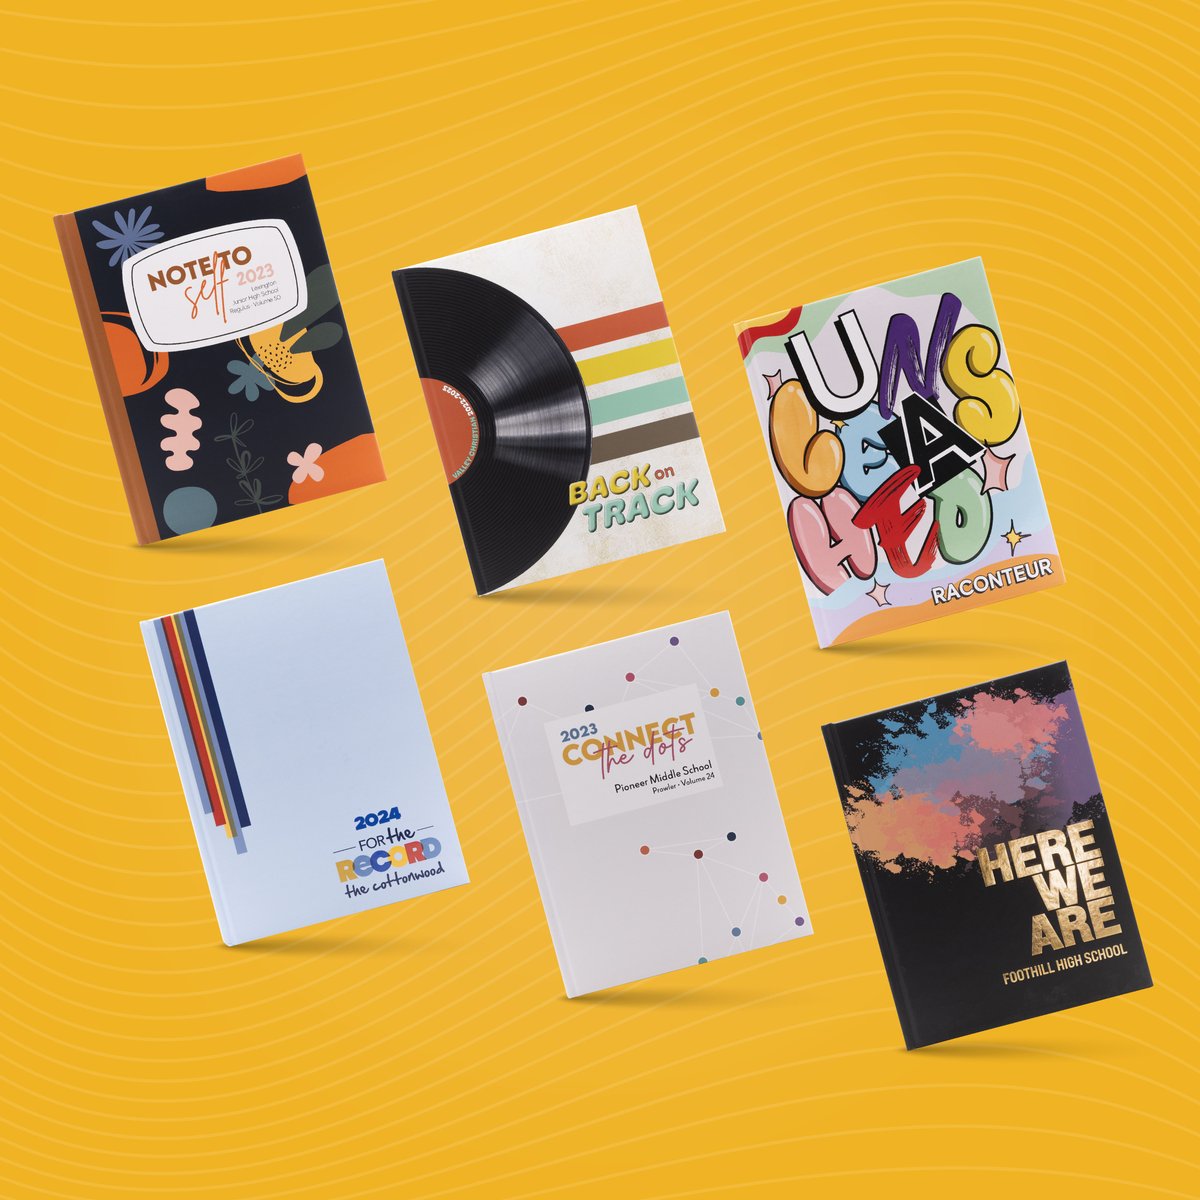 Preserve Memories with O'Neil Printing Yearbooks! 📚 Capture your school year with our beautifully crafted yearbooks. Each one designed to reflect your school's spirit.
Contact us to get started! 📧🖨️hubs.li/Q02xg60F0
#ONeilPrinting #CaptureTheMoment #ONeilPrintingKeepsakes